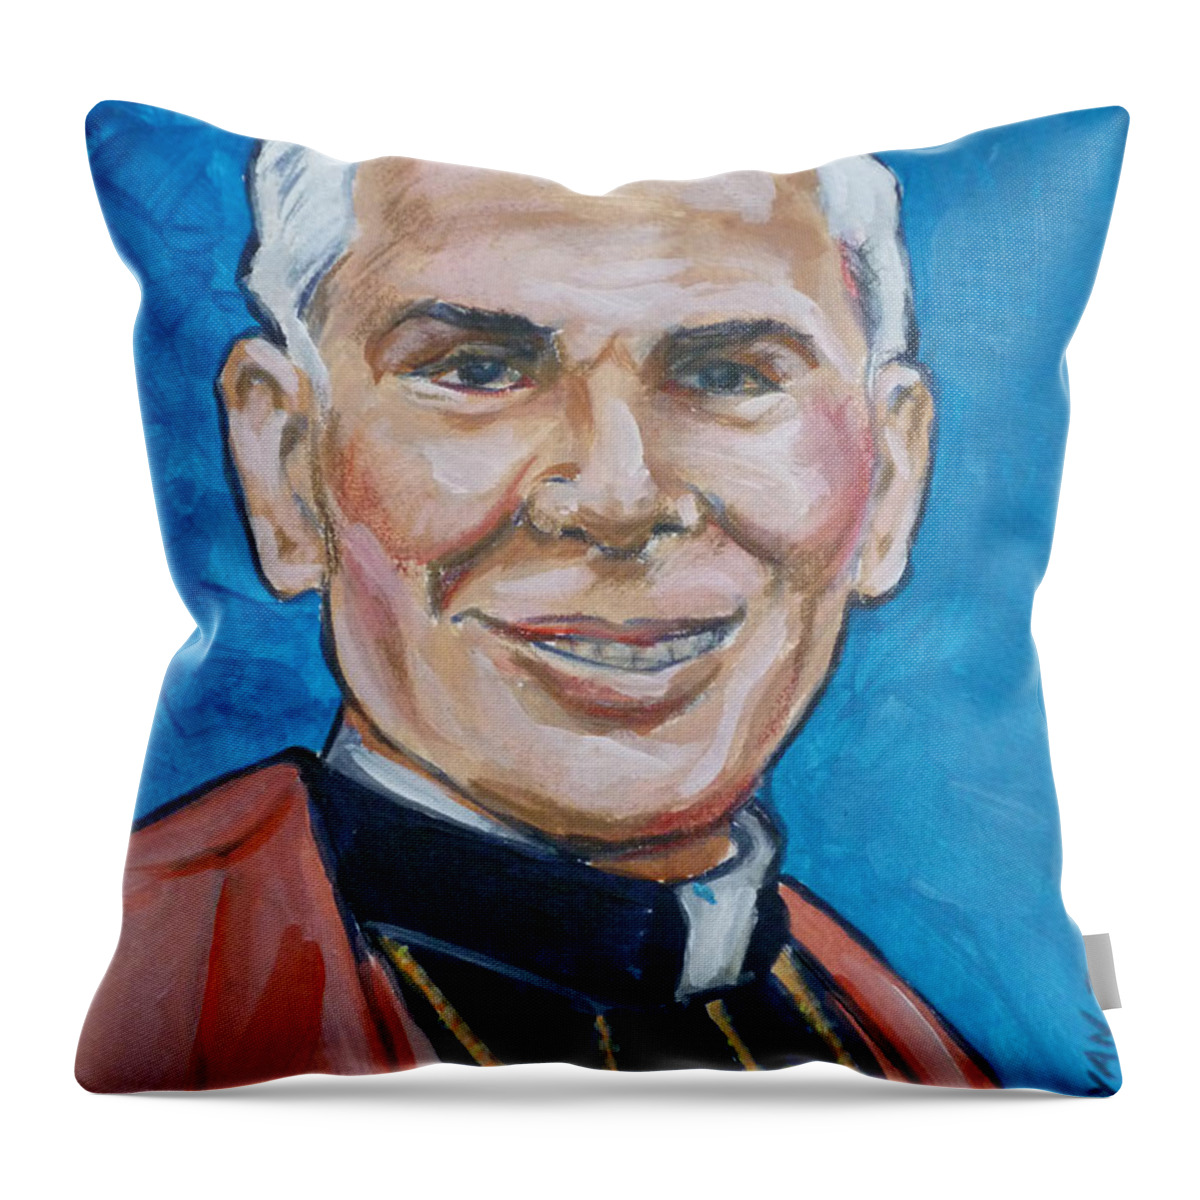 Archbishop Throw Pillow featuring the painting Archbishop Fulton J. Sheen by Bryan Bustard